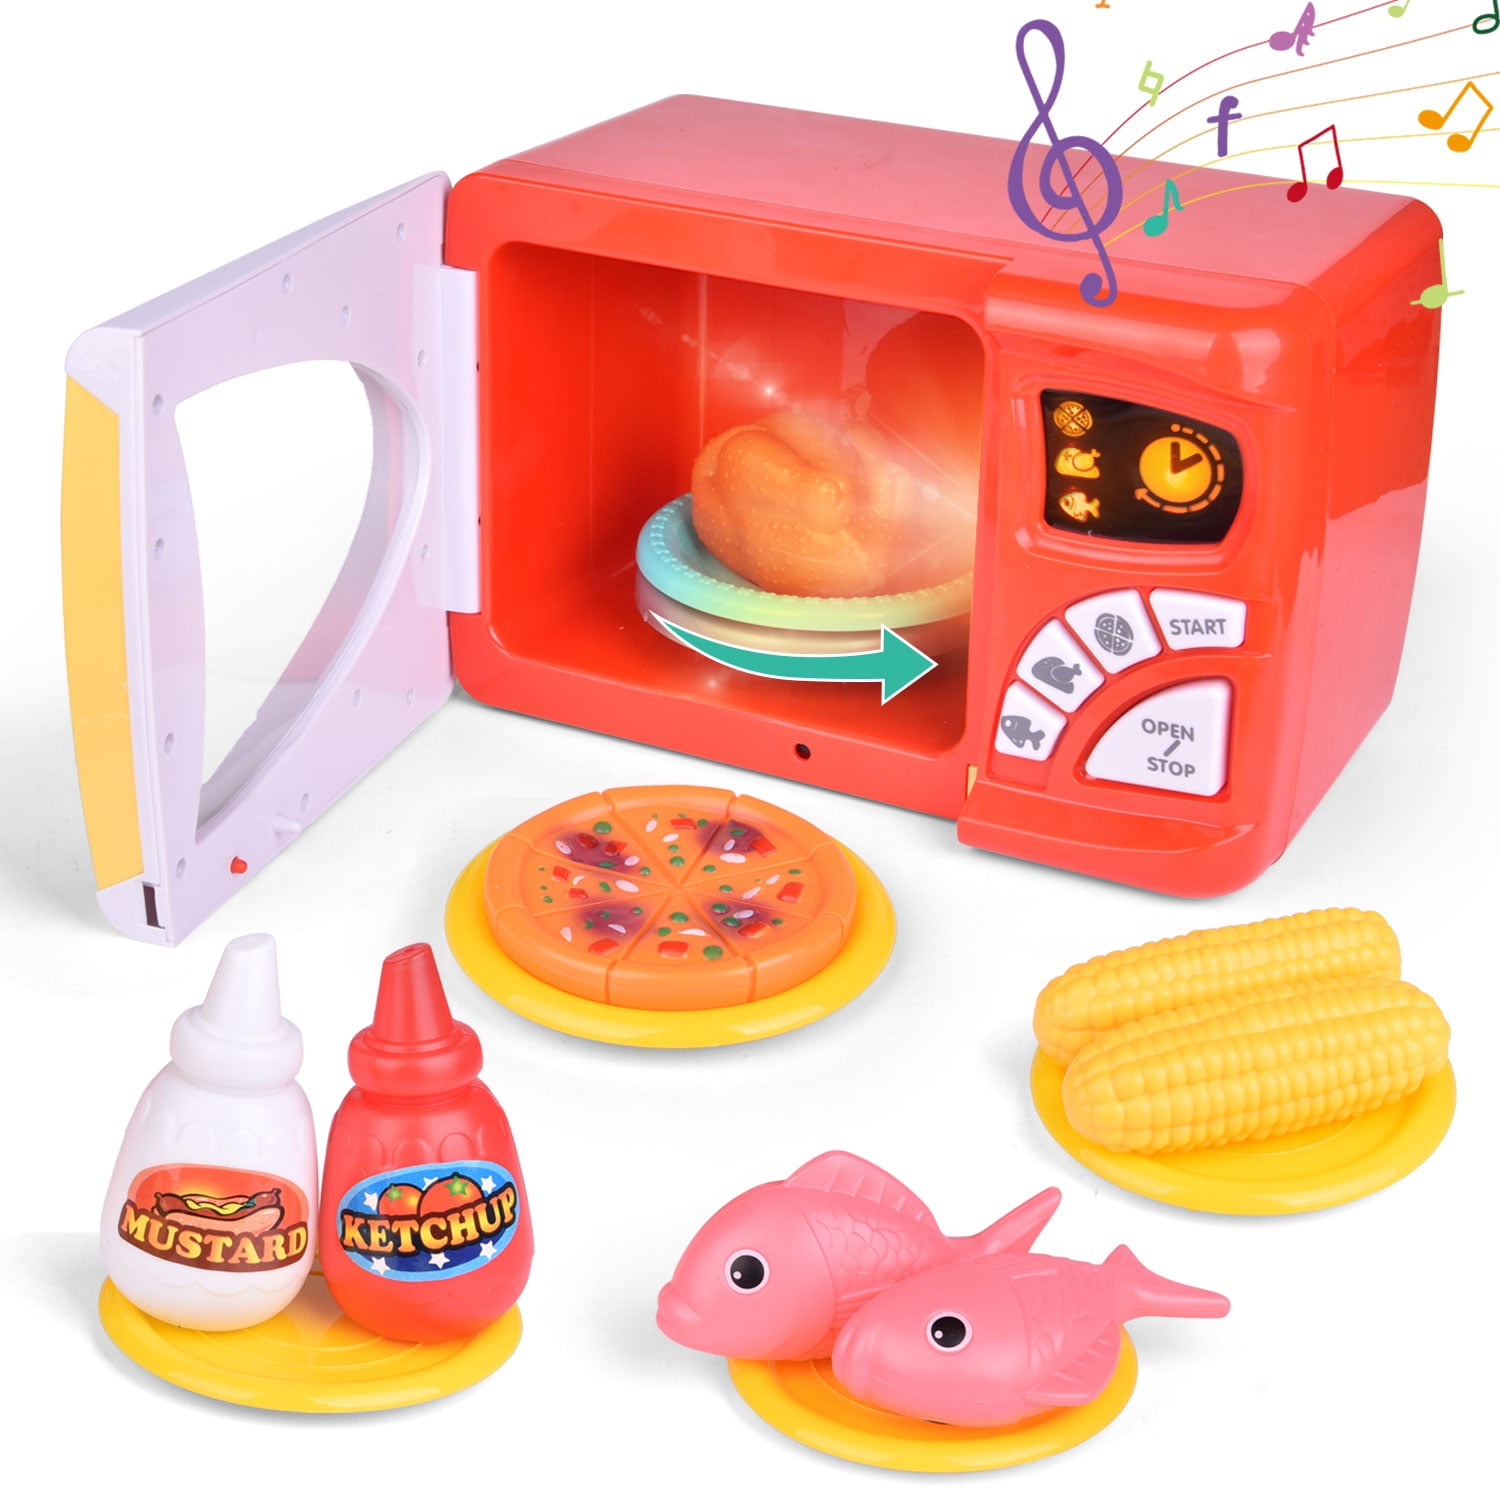 Toy Microwave Children's Kitchen Pretend Play Playset with Play Food